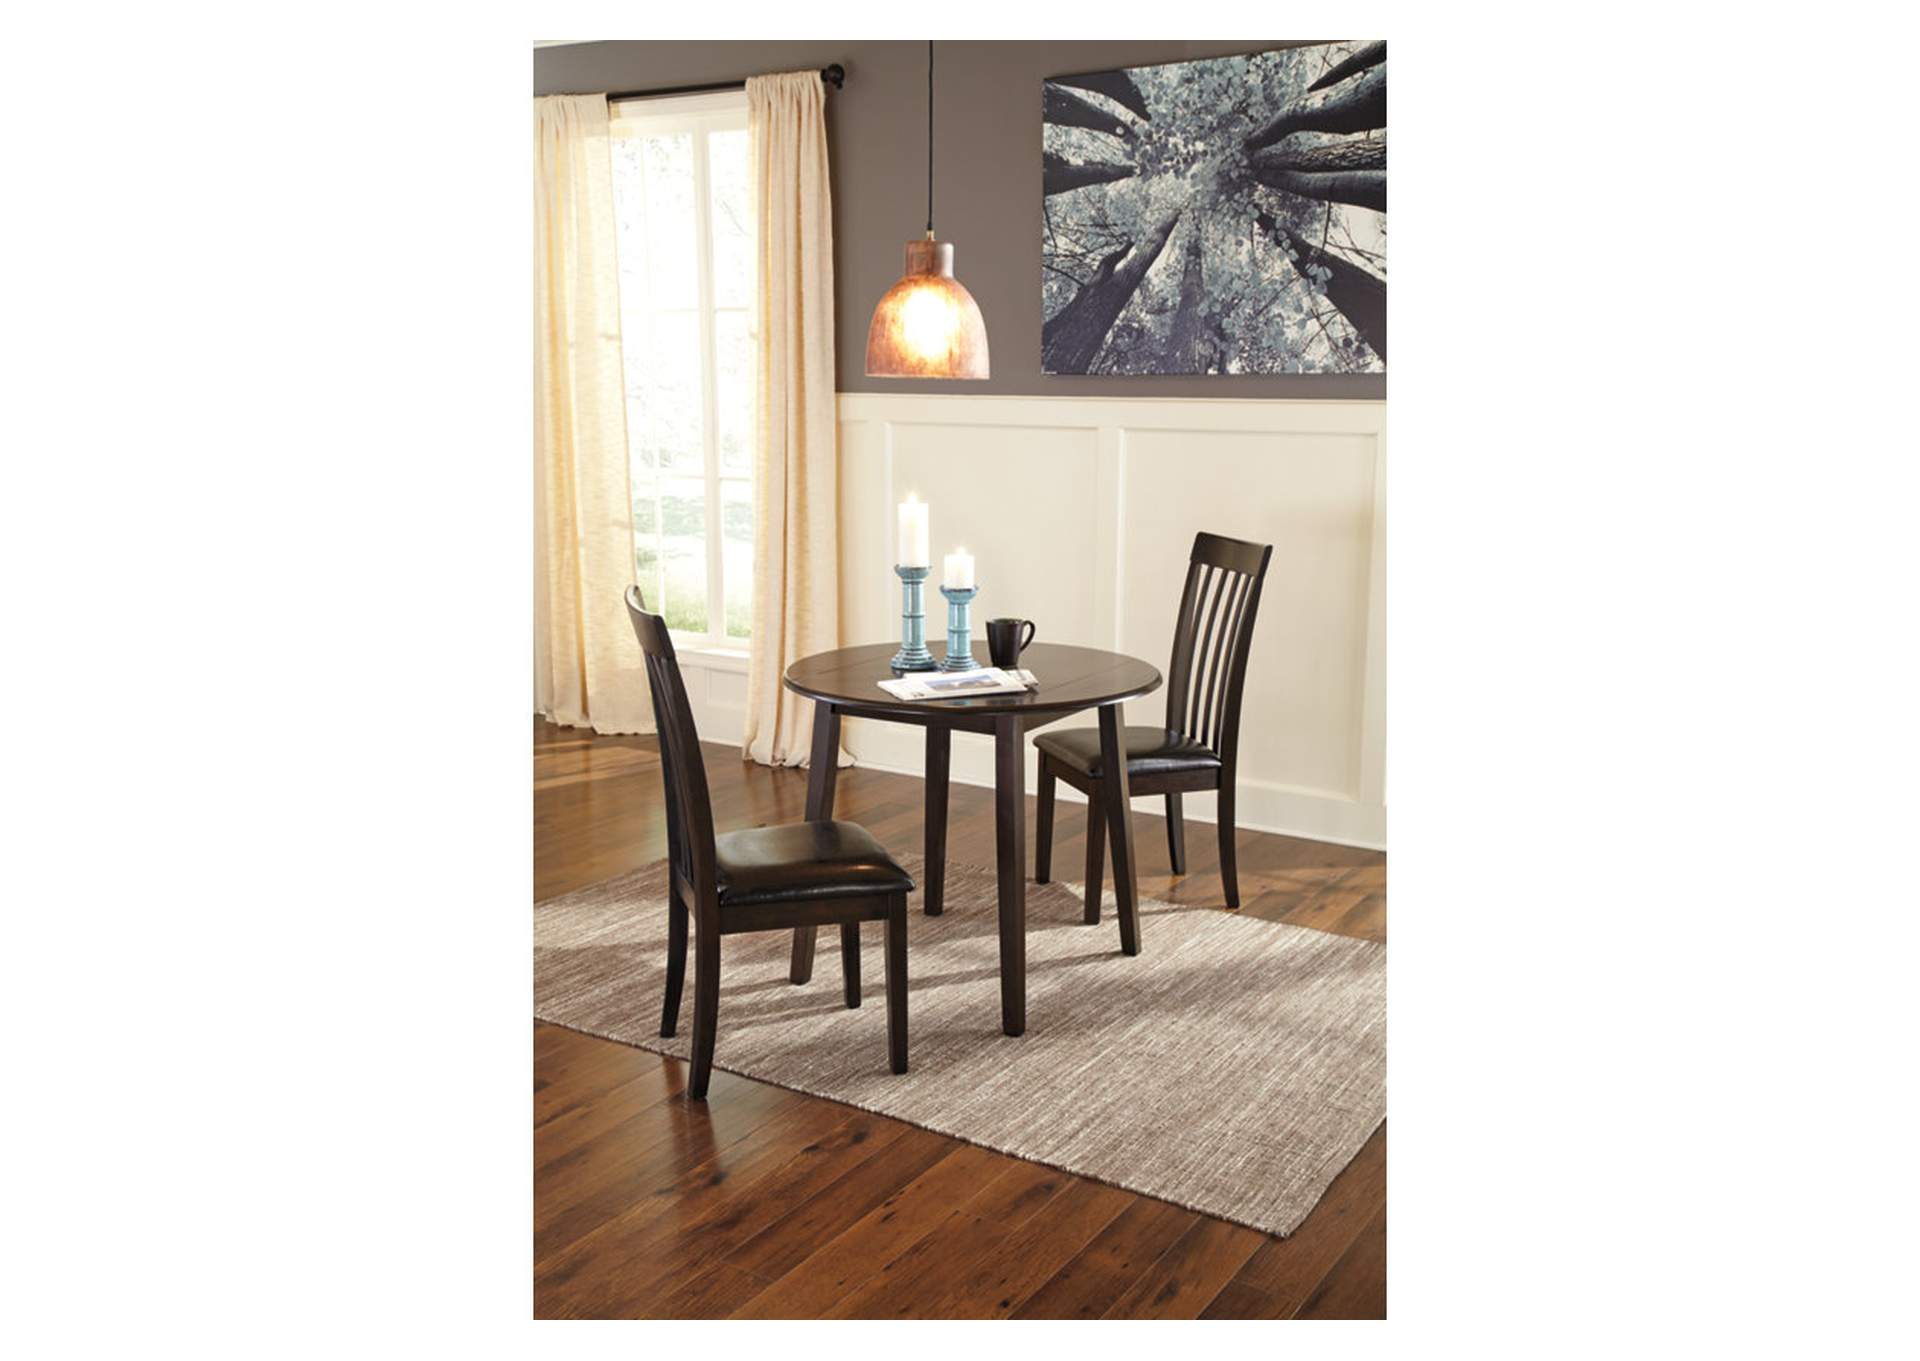 Hammis Dining Room Drop Leaf Table,Direct To Consumer Express